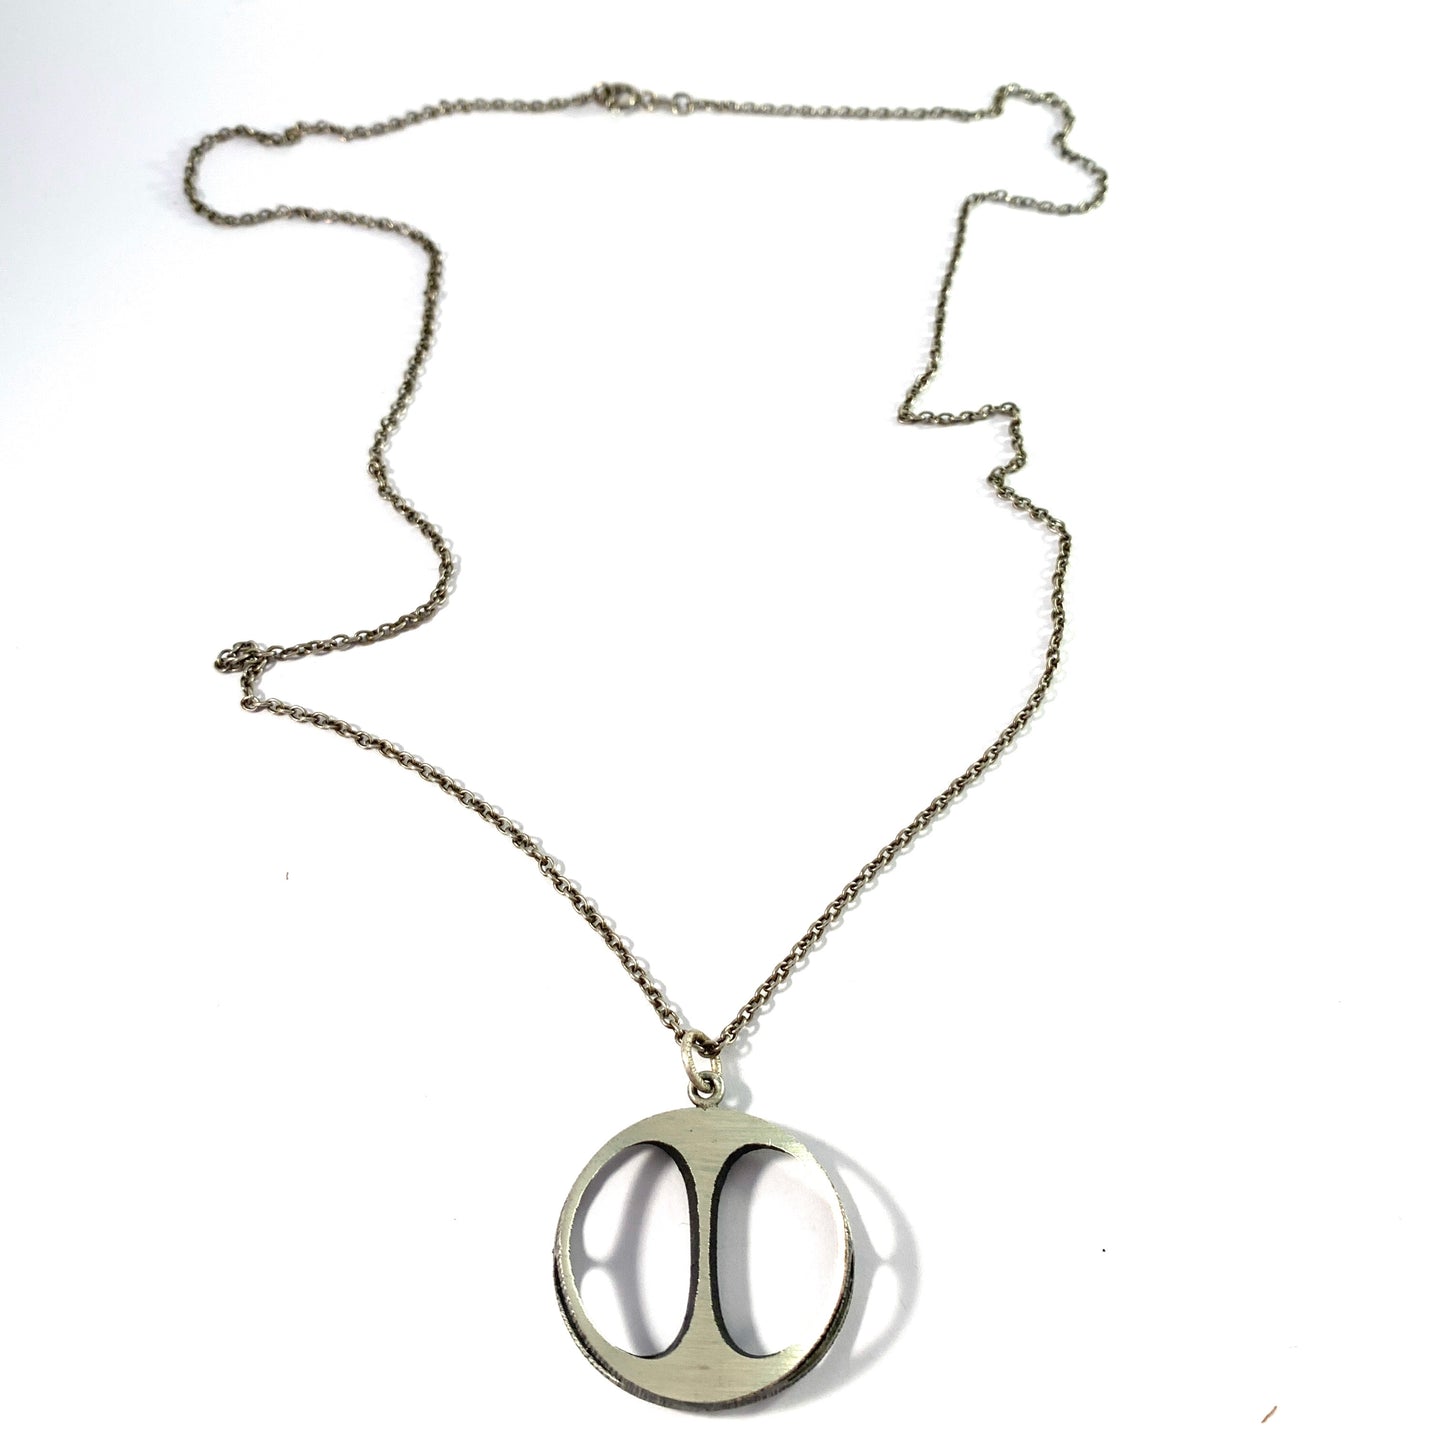 Karl Laine, for Sten & Laine, Finland 1973 Sterling Silver Long Chain Pendant Necklace.